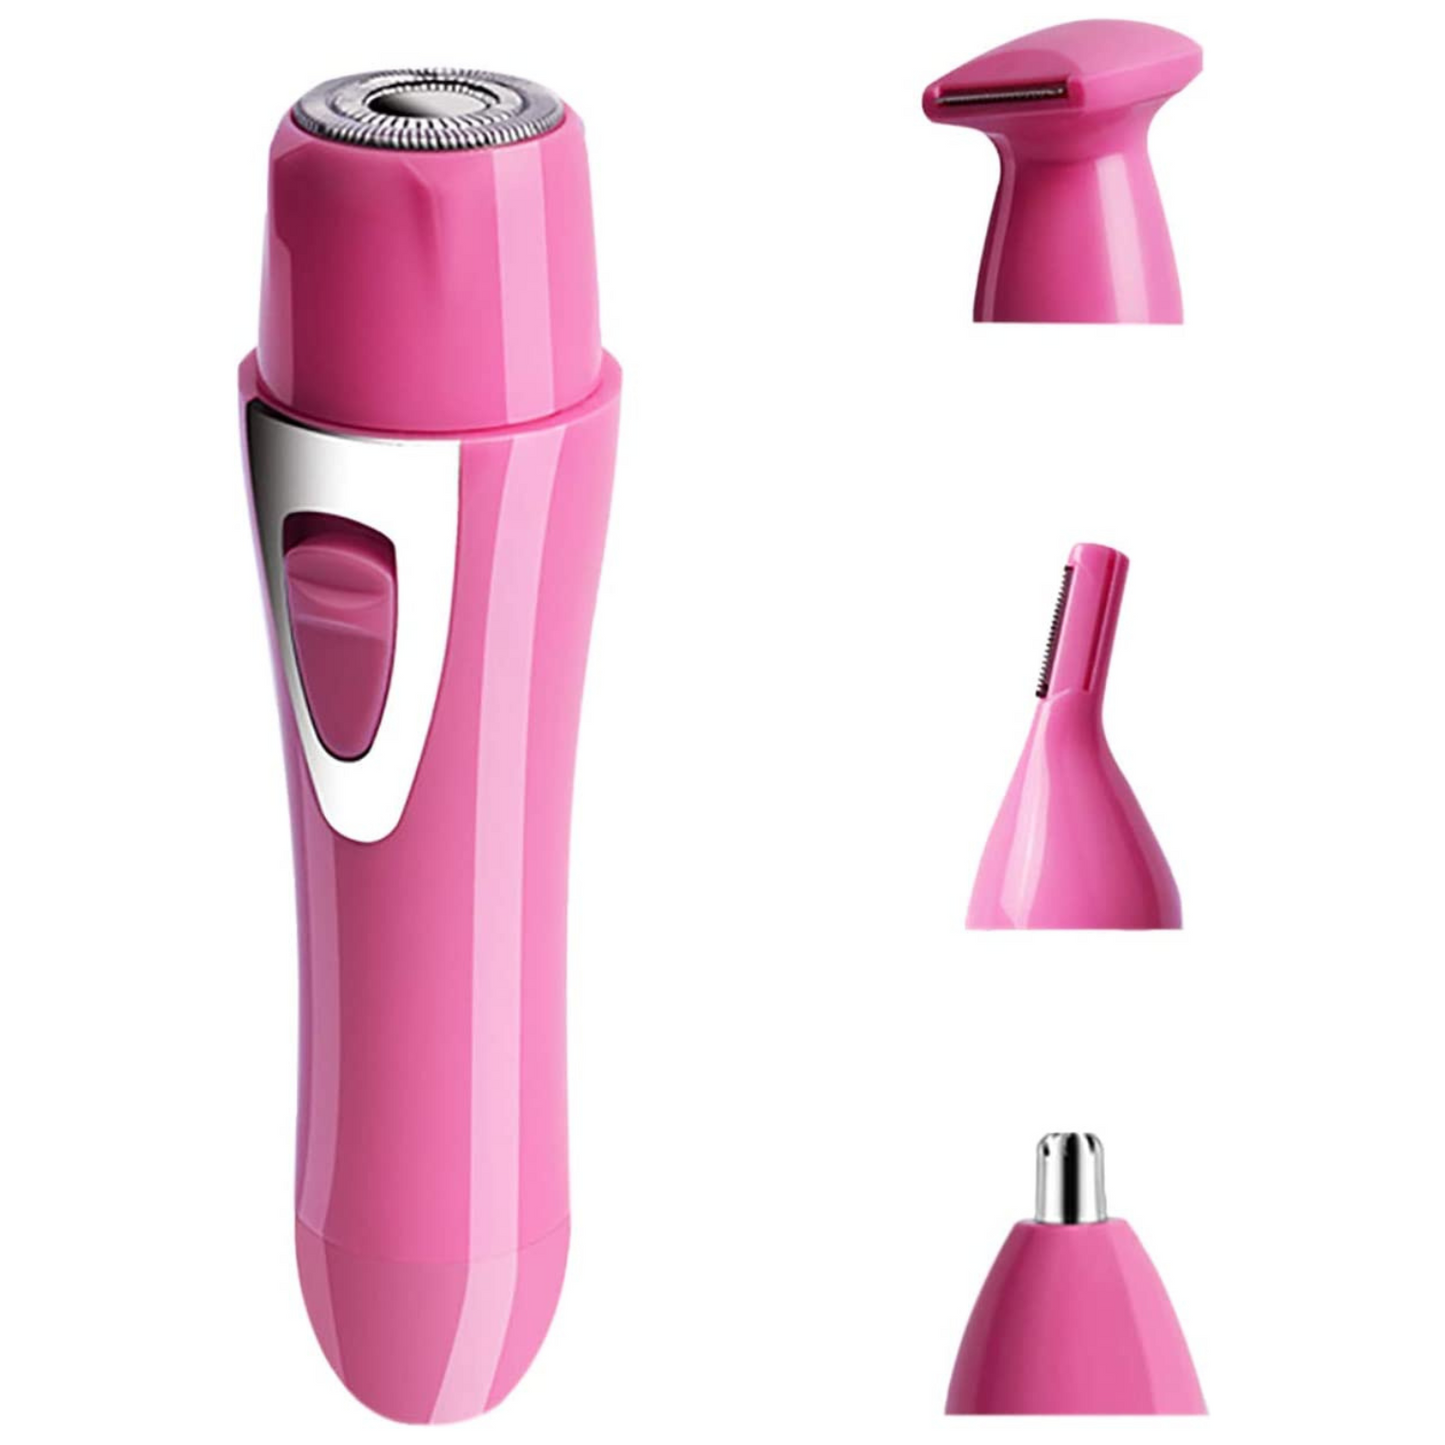 4-in-1 Women's Painless Compact Electric Facial Hair Epilator Remover